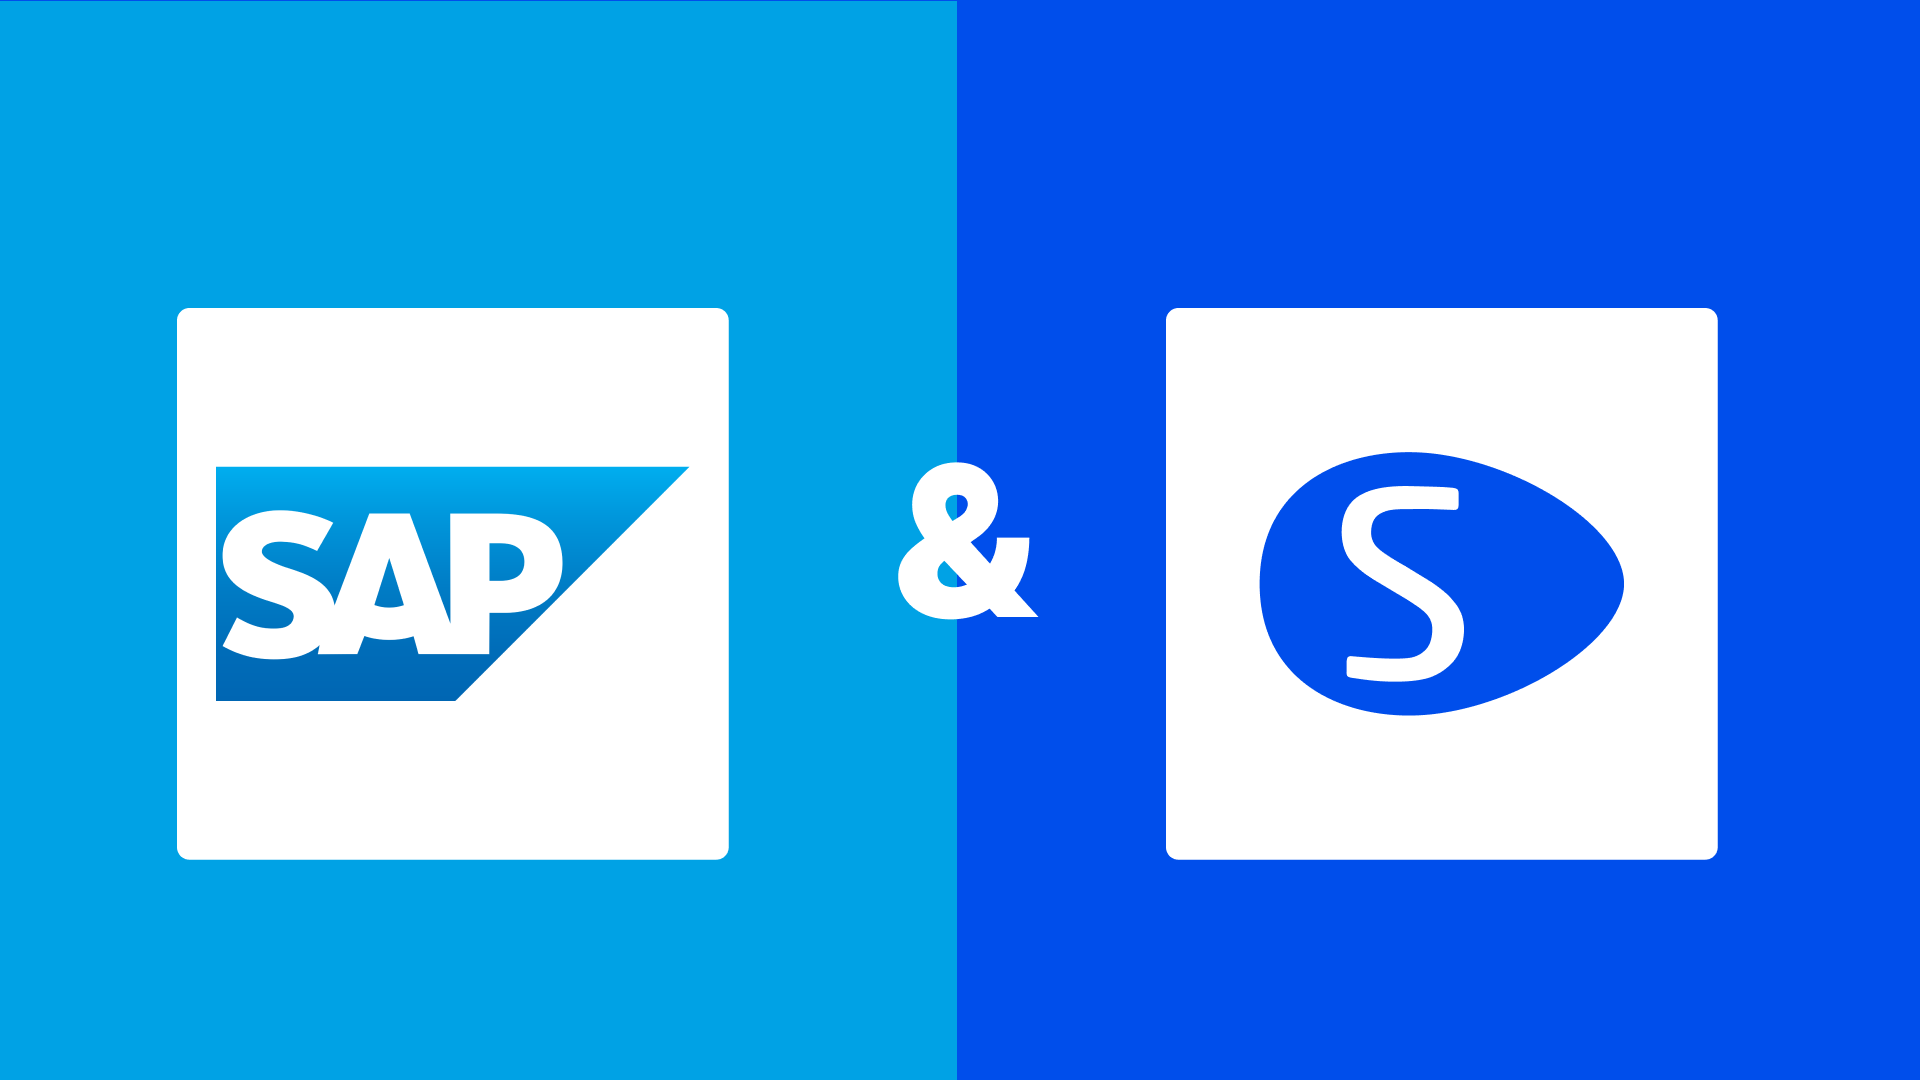 Benefits of using SAP ERP and Streamline together